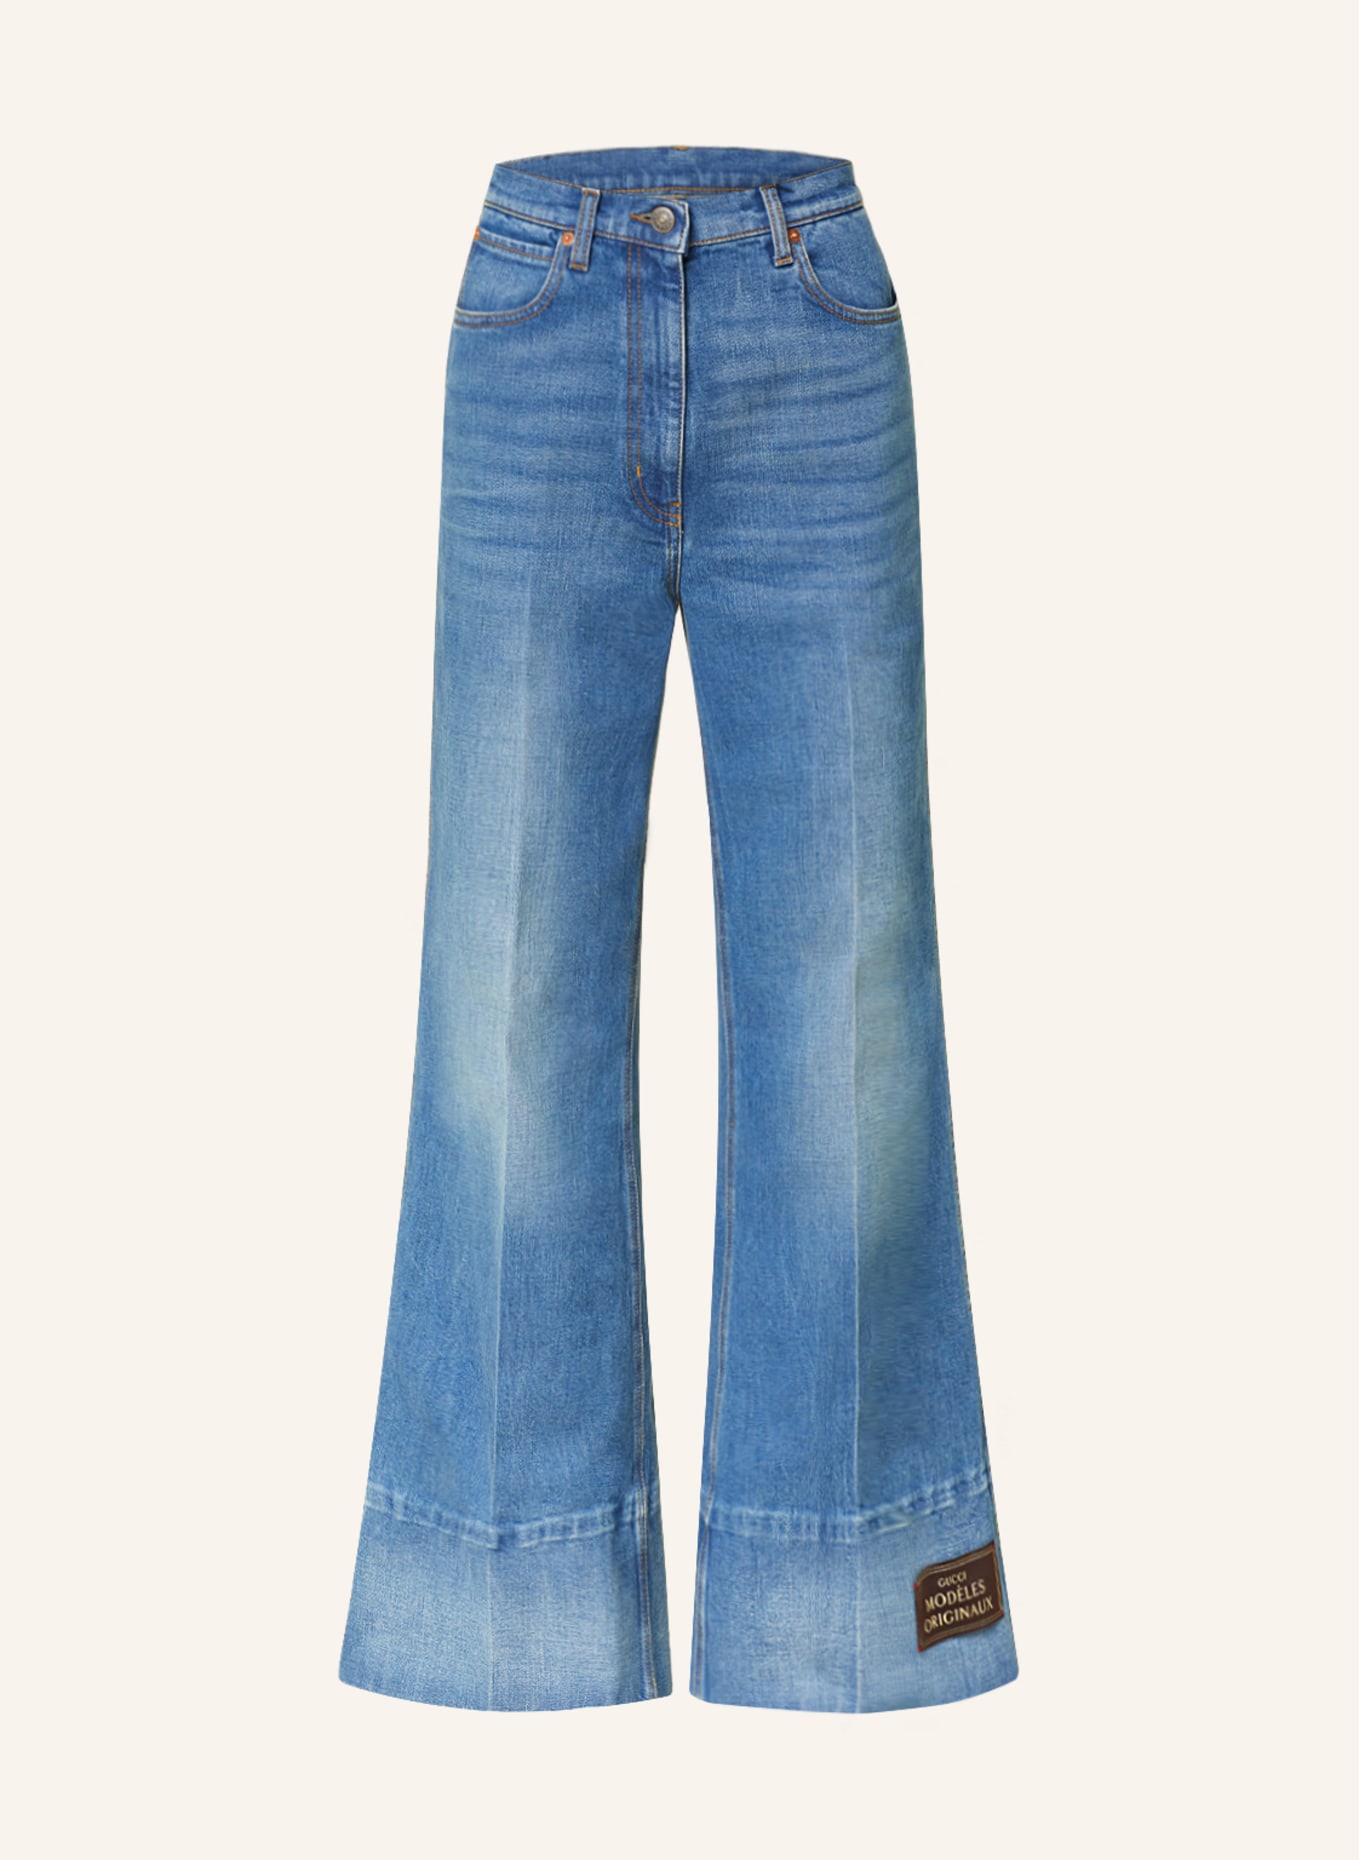 GUCCI Flared jeans, Color: 4759 DARK BLUE/MIX (Image 1)